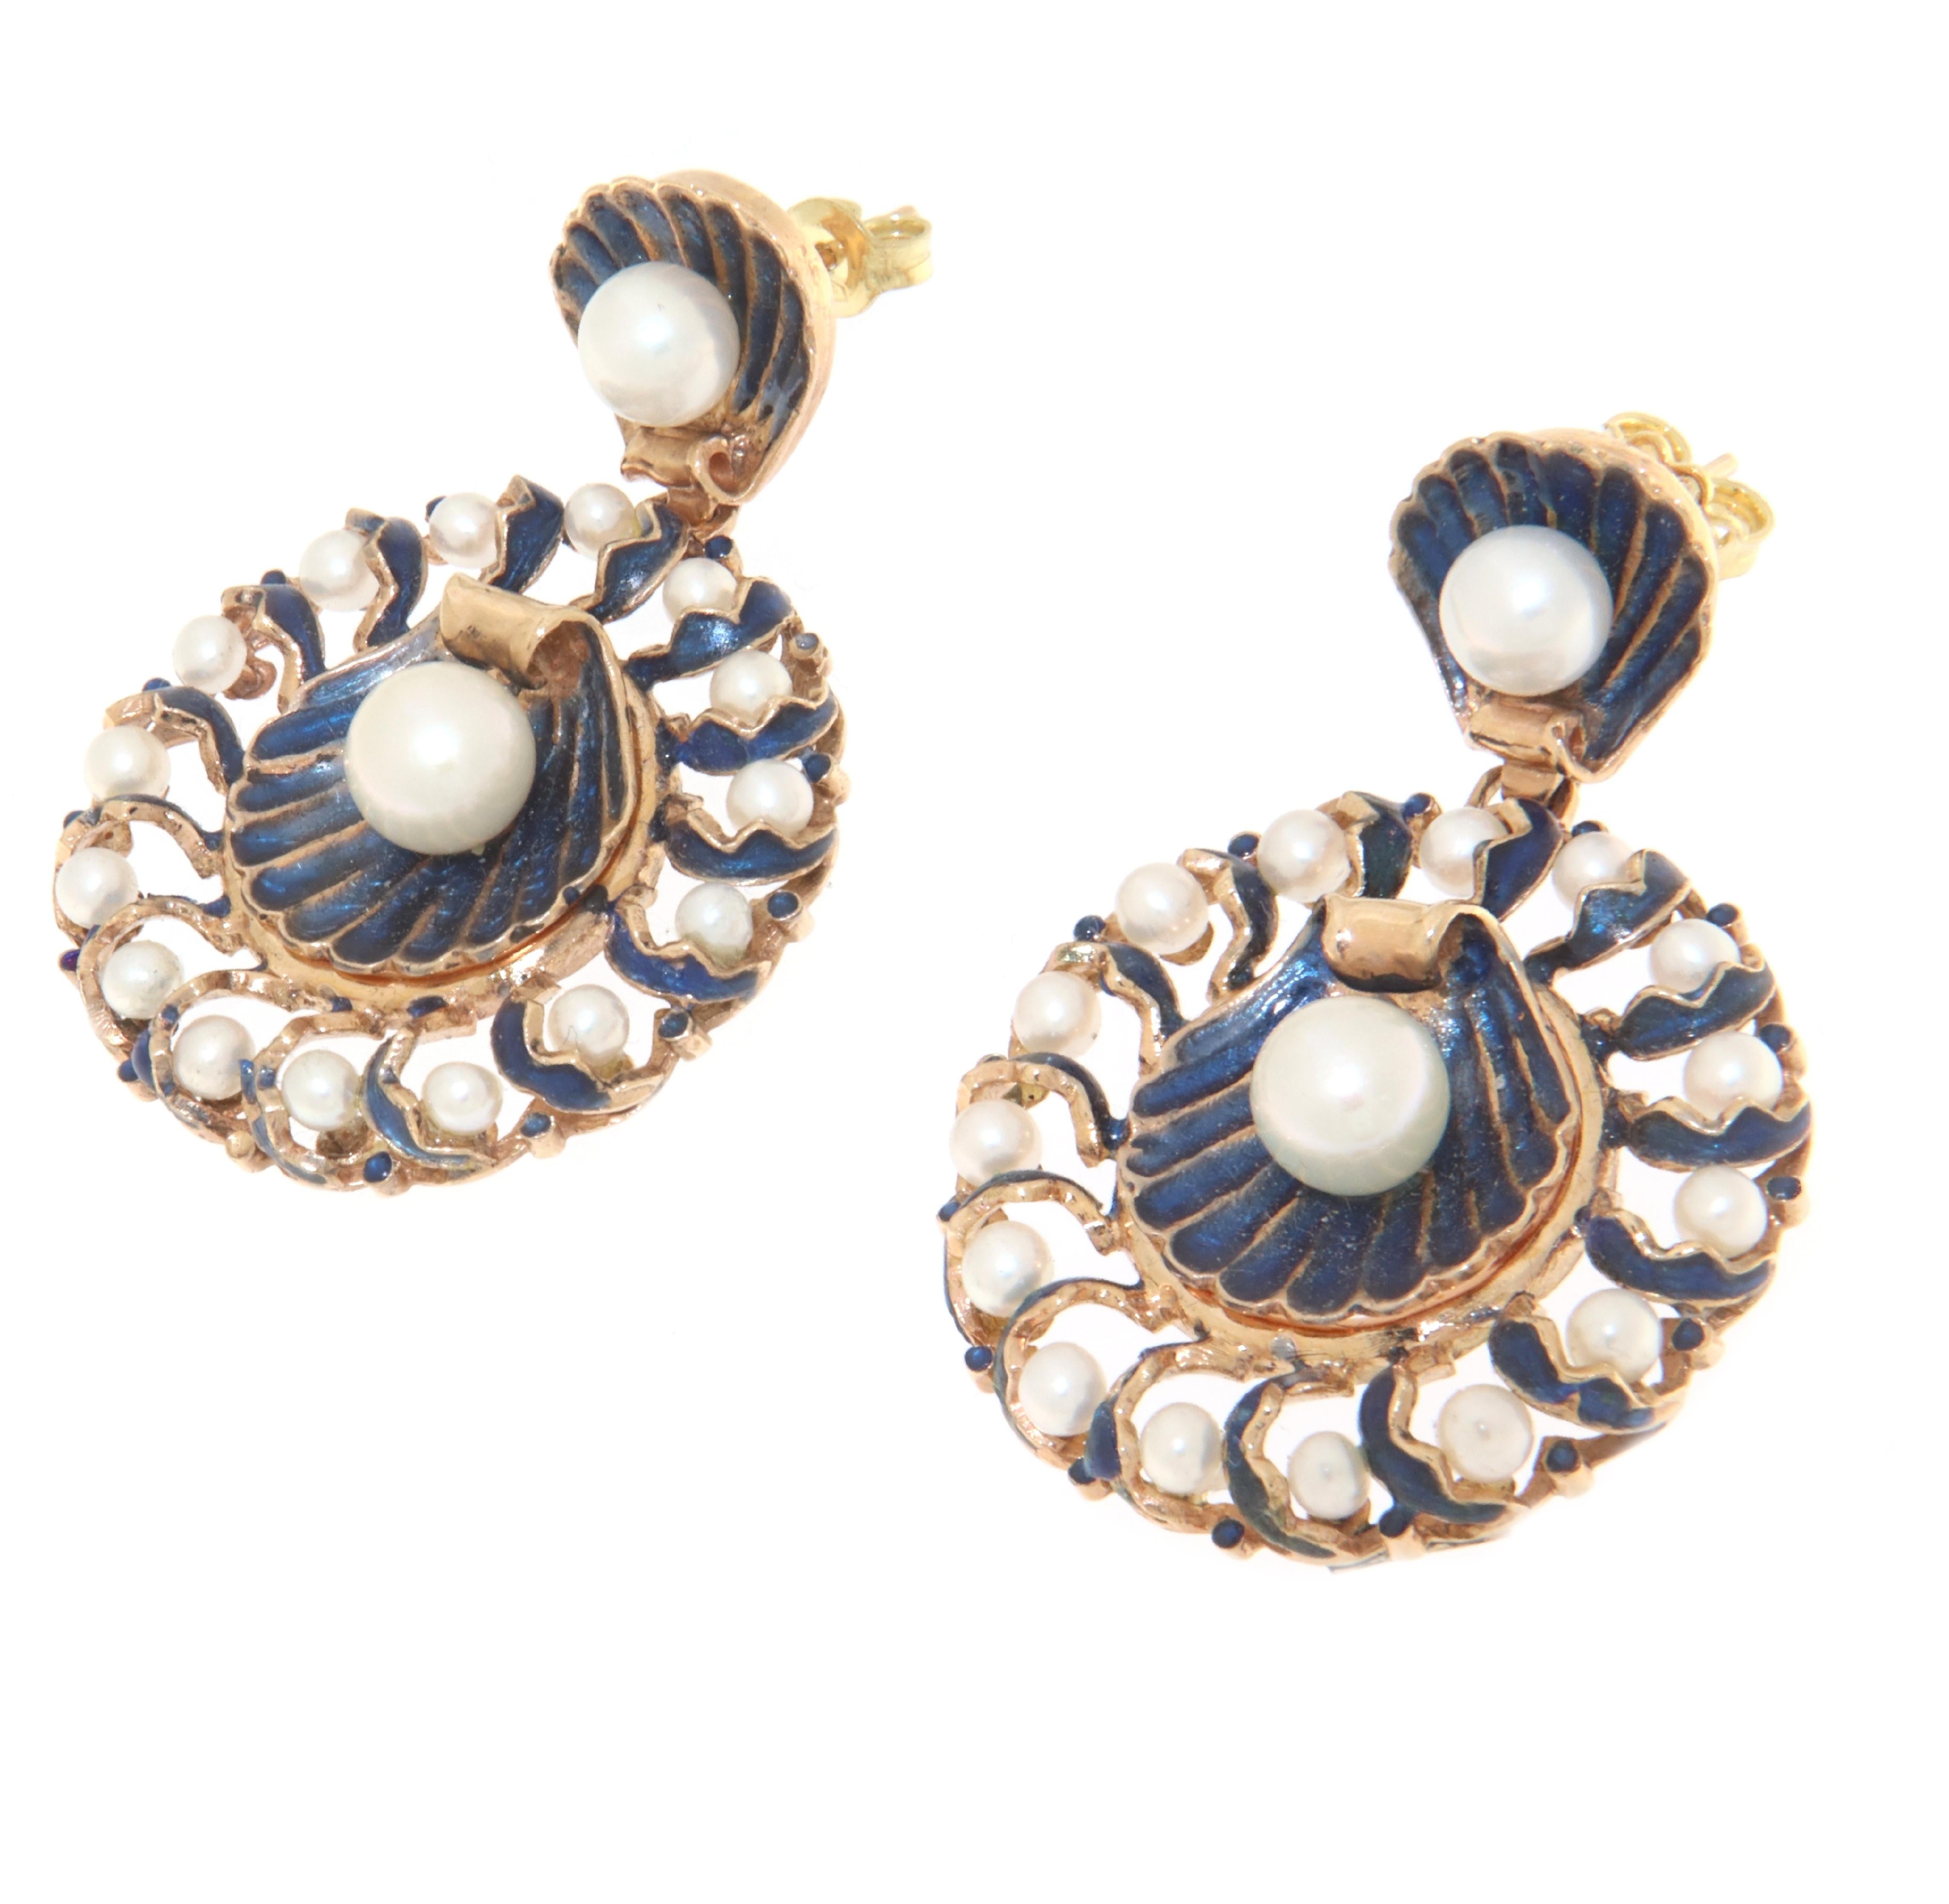 These sumptuous 14-carat yellow gold earrings offer a seductive blend of classic elegance and artistic design. Inspired by the majestic shape of the seashell, each earring is meticulously crafted to evoke the essence of the sea.

At the center of